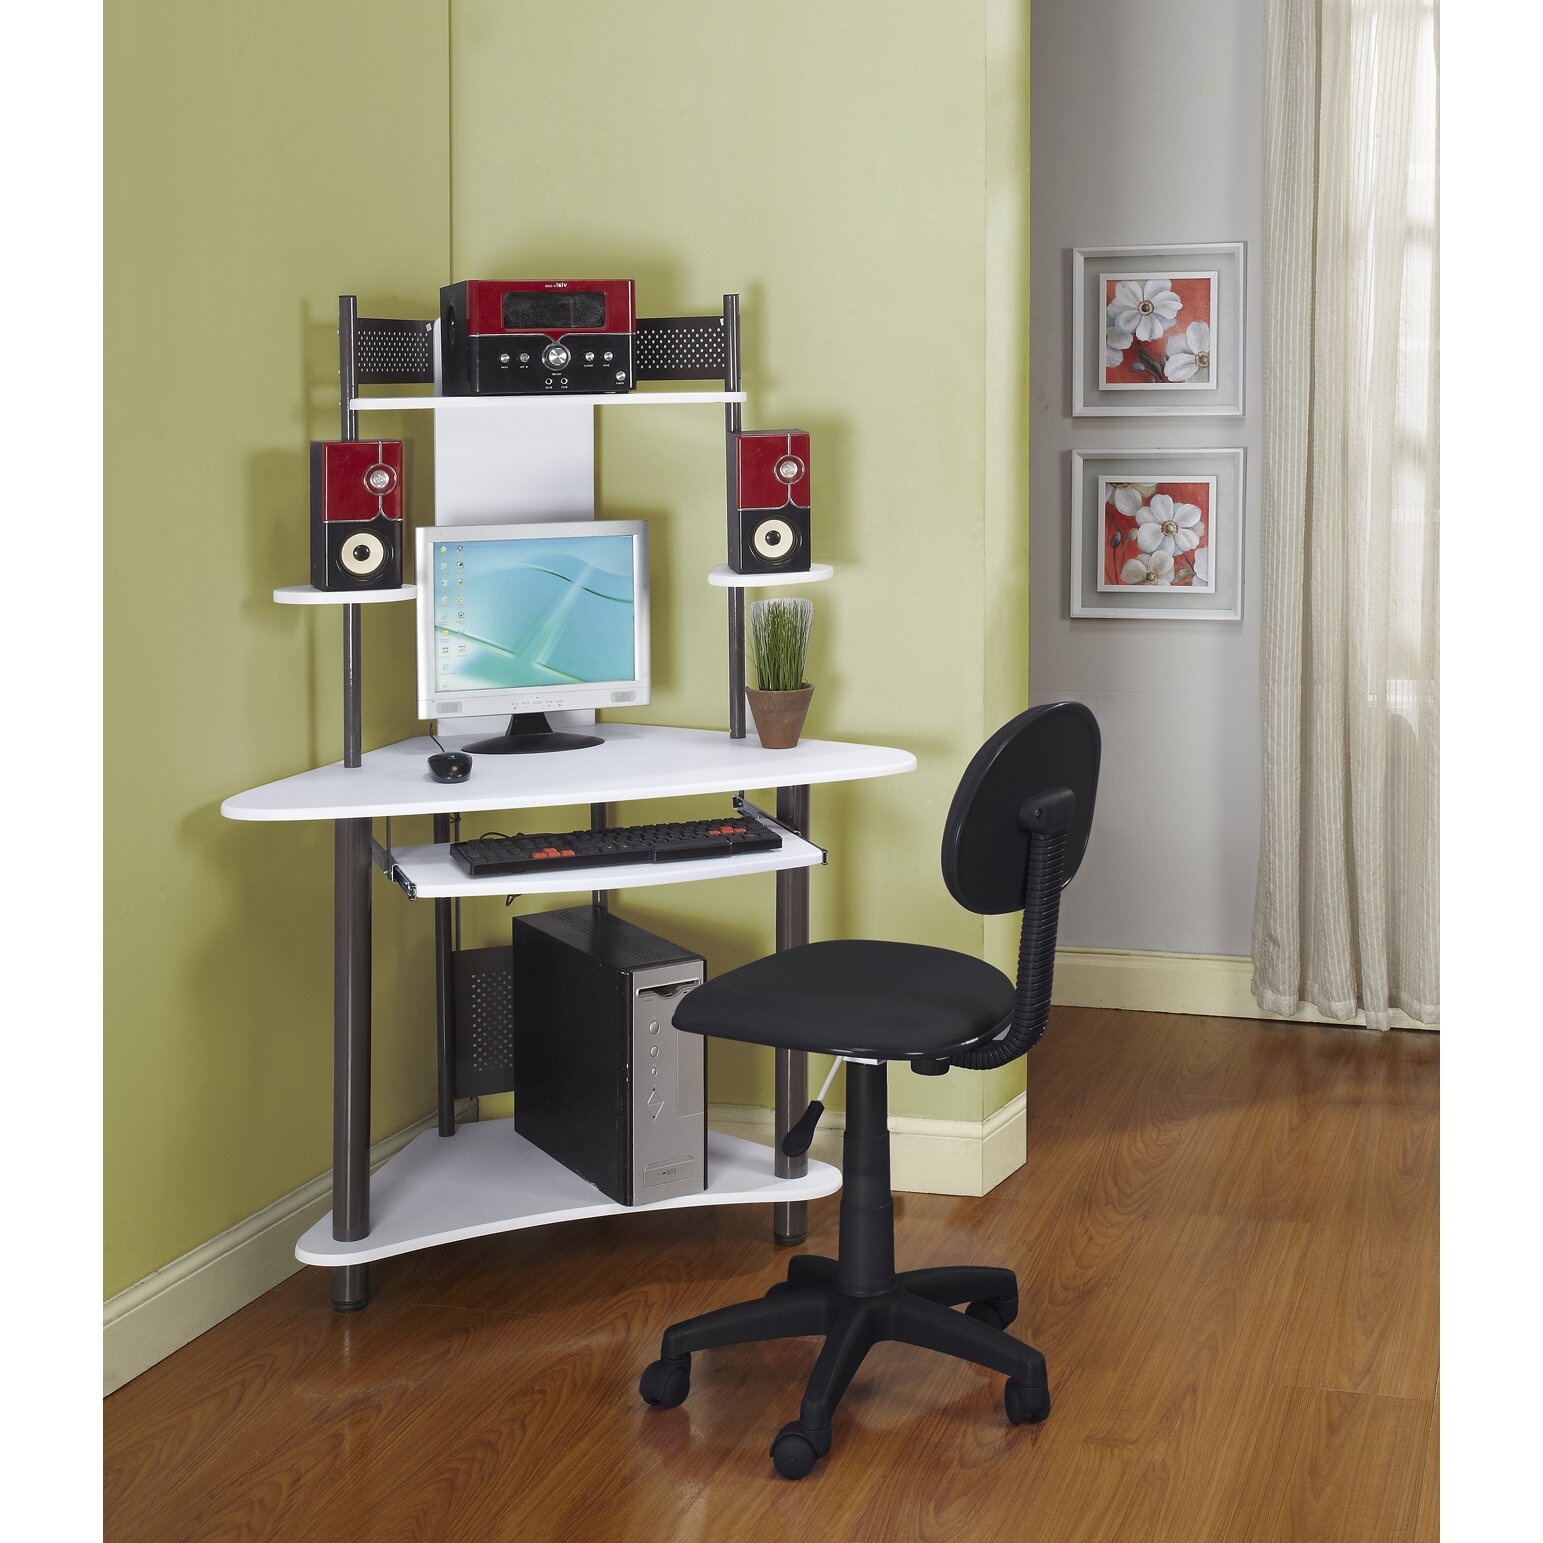 50 Computer Desk For Small Spaces, Compact Computer Desk With Shelves